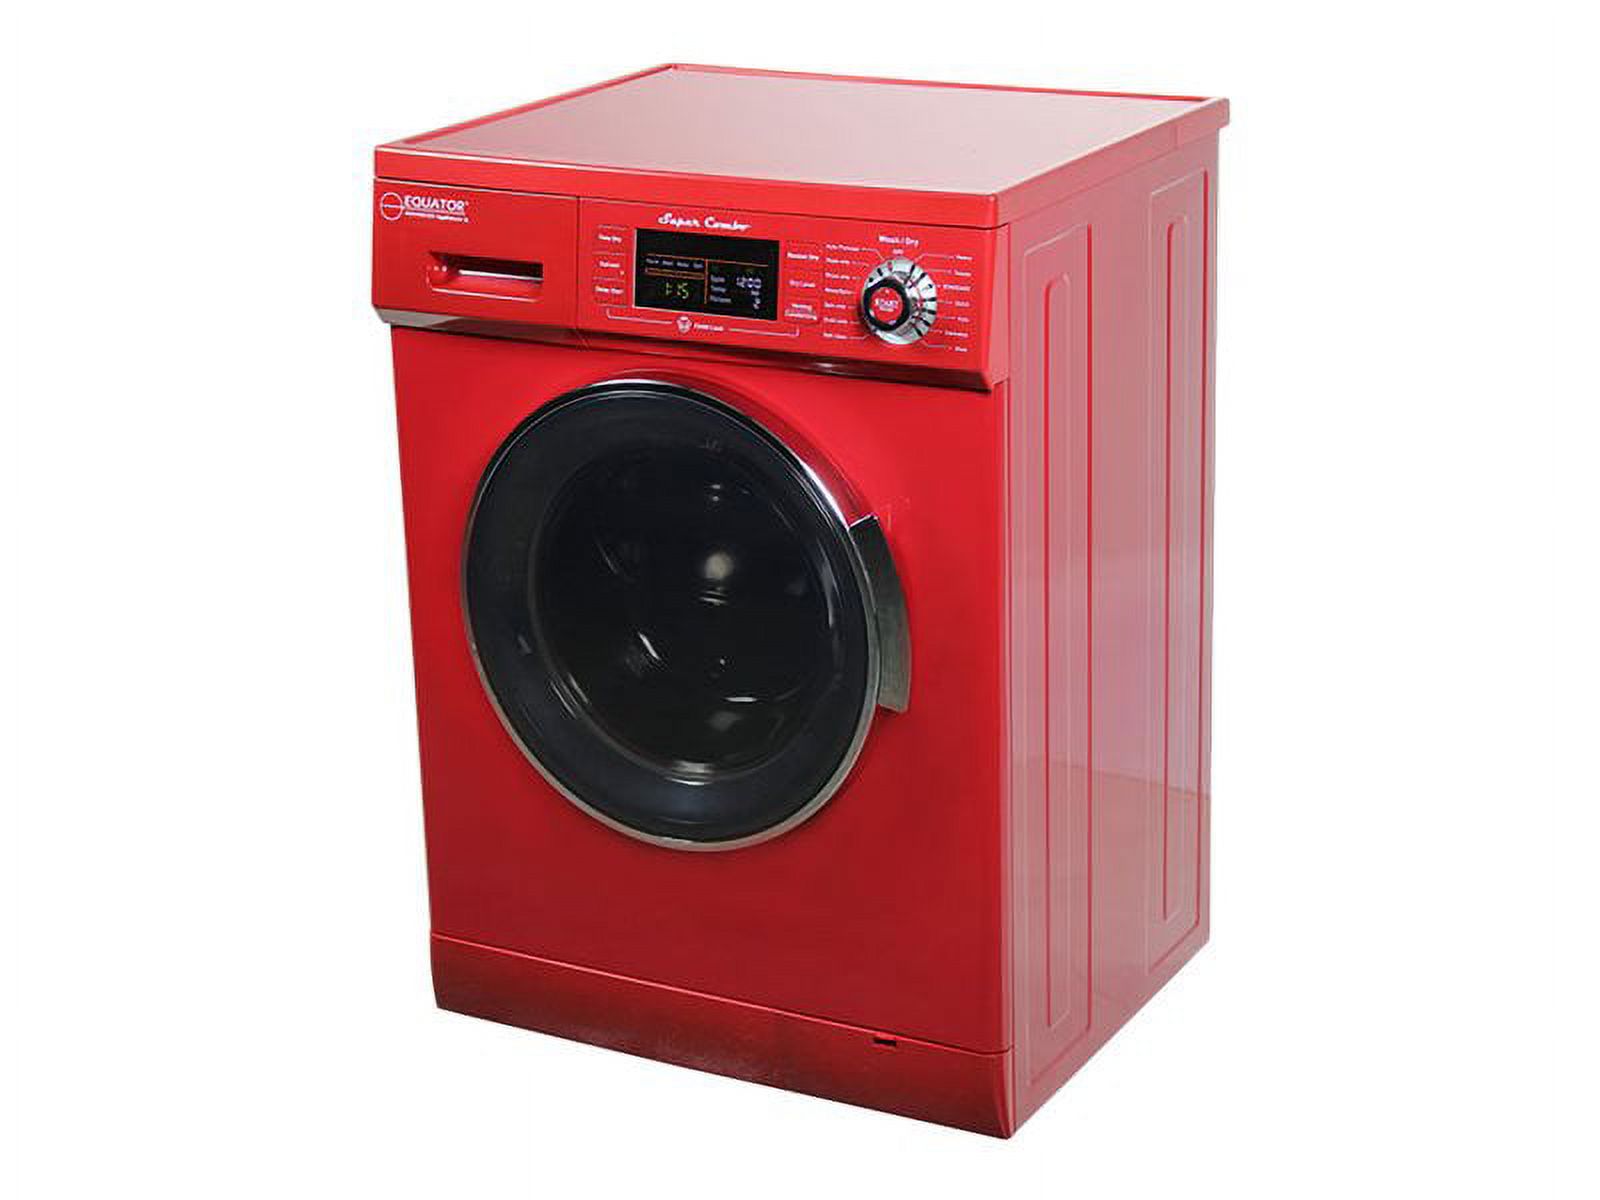 Equator All-in-one 13 lb Compact Combo Washer Dryer, Red - image 3 of 6